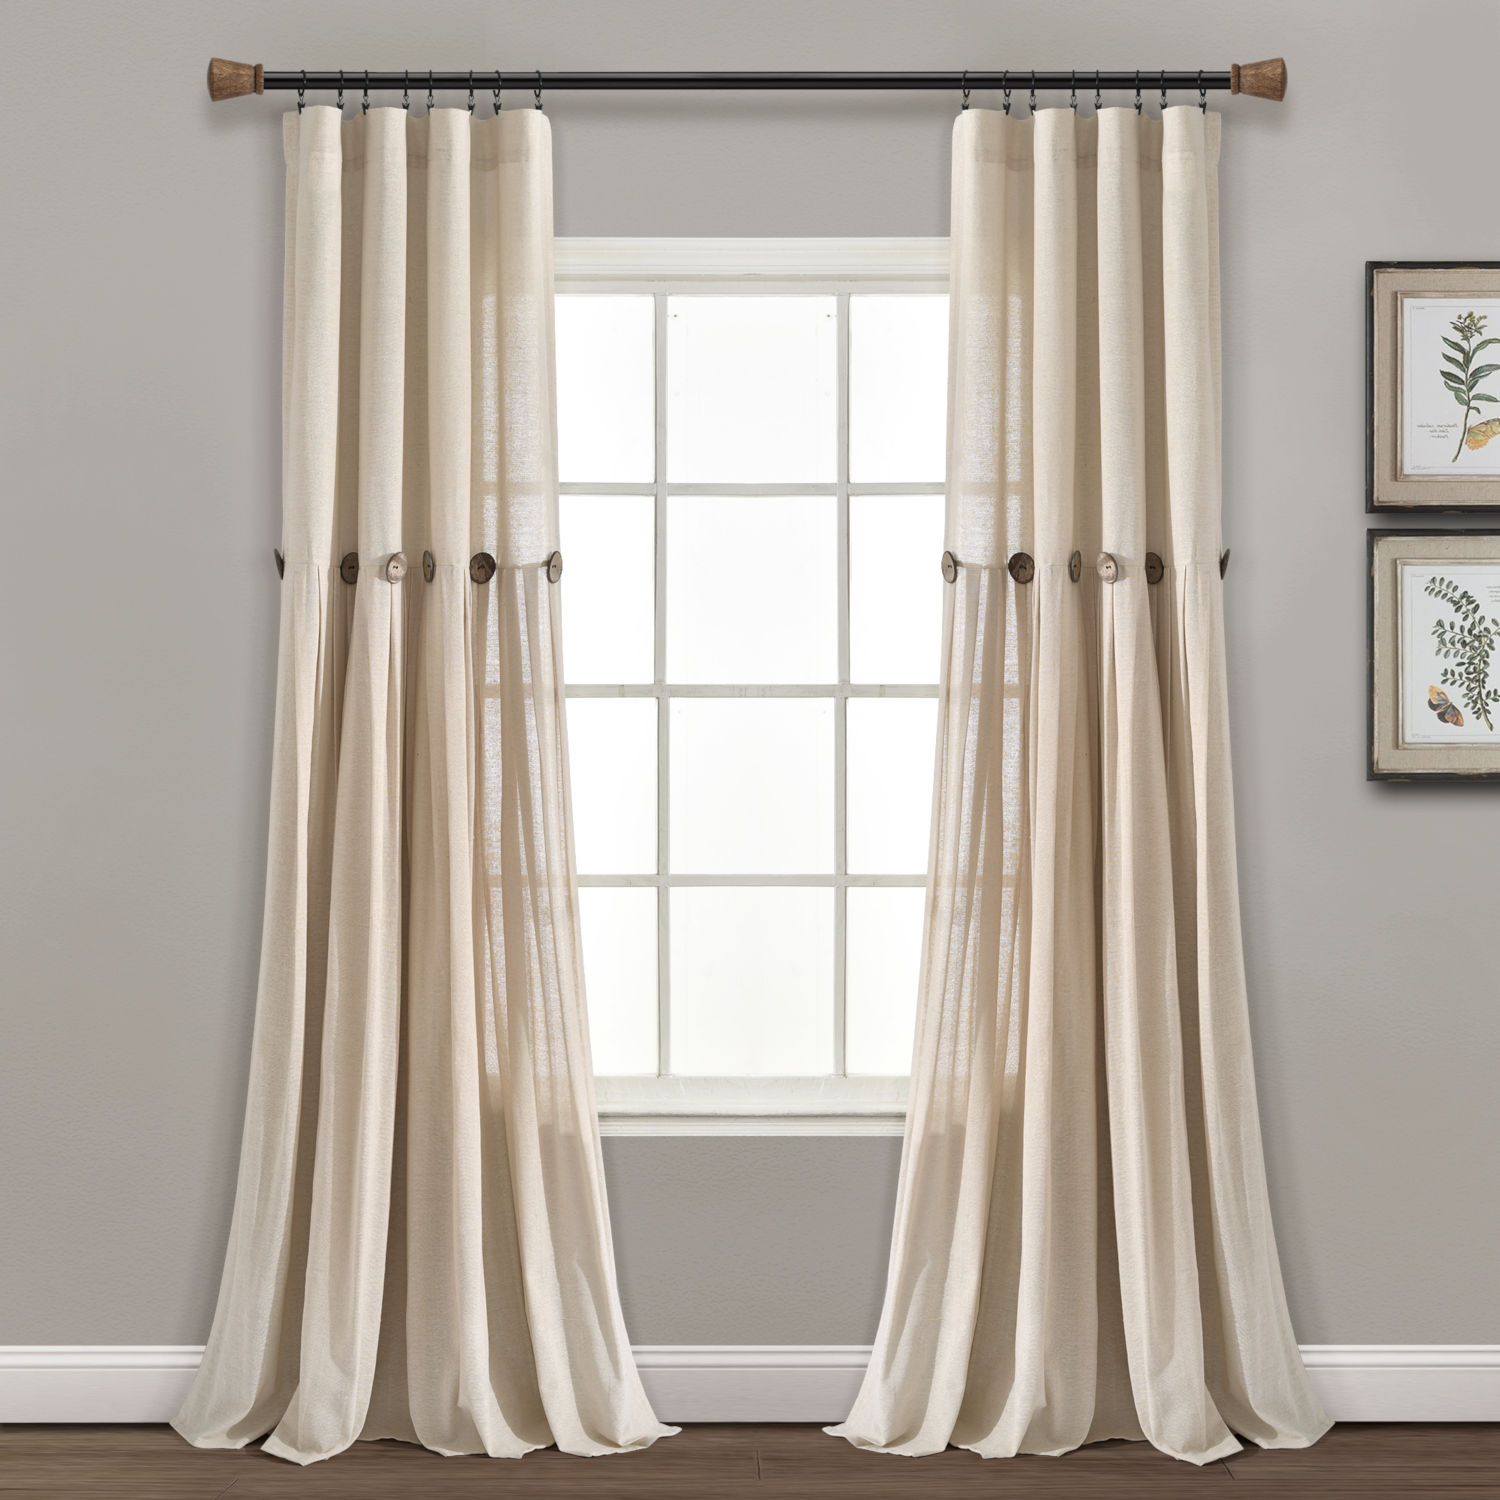 Curtains & Drapes Category